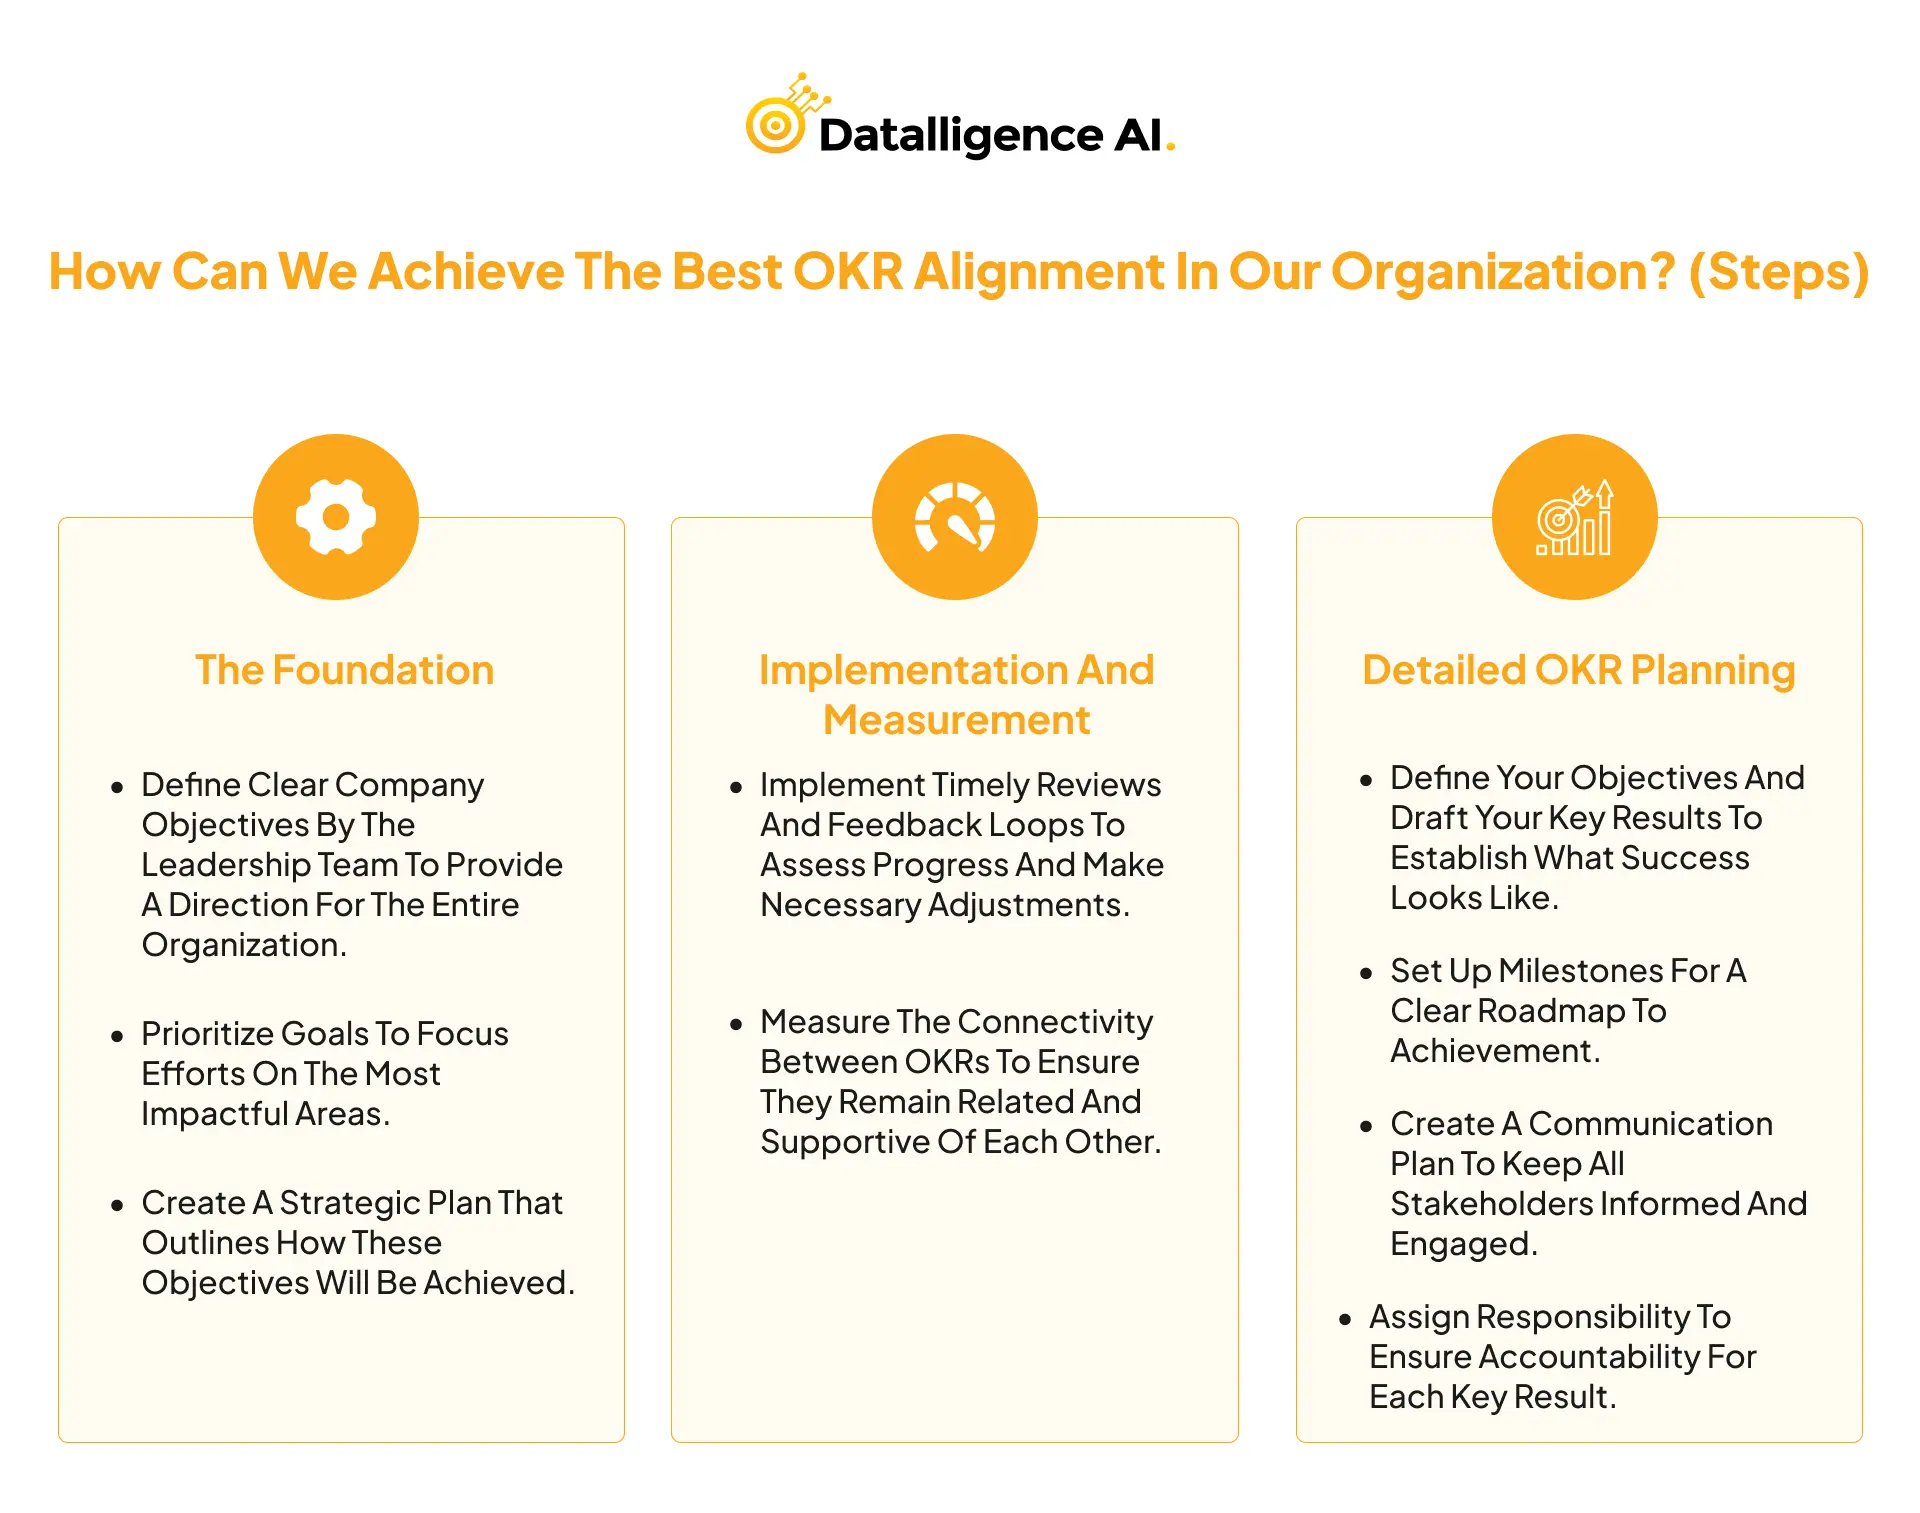 How can we achieve the best OKR alignment in our organization_ (Steps) 